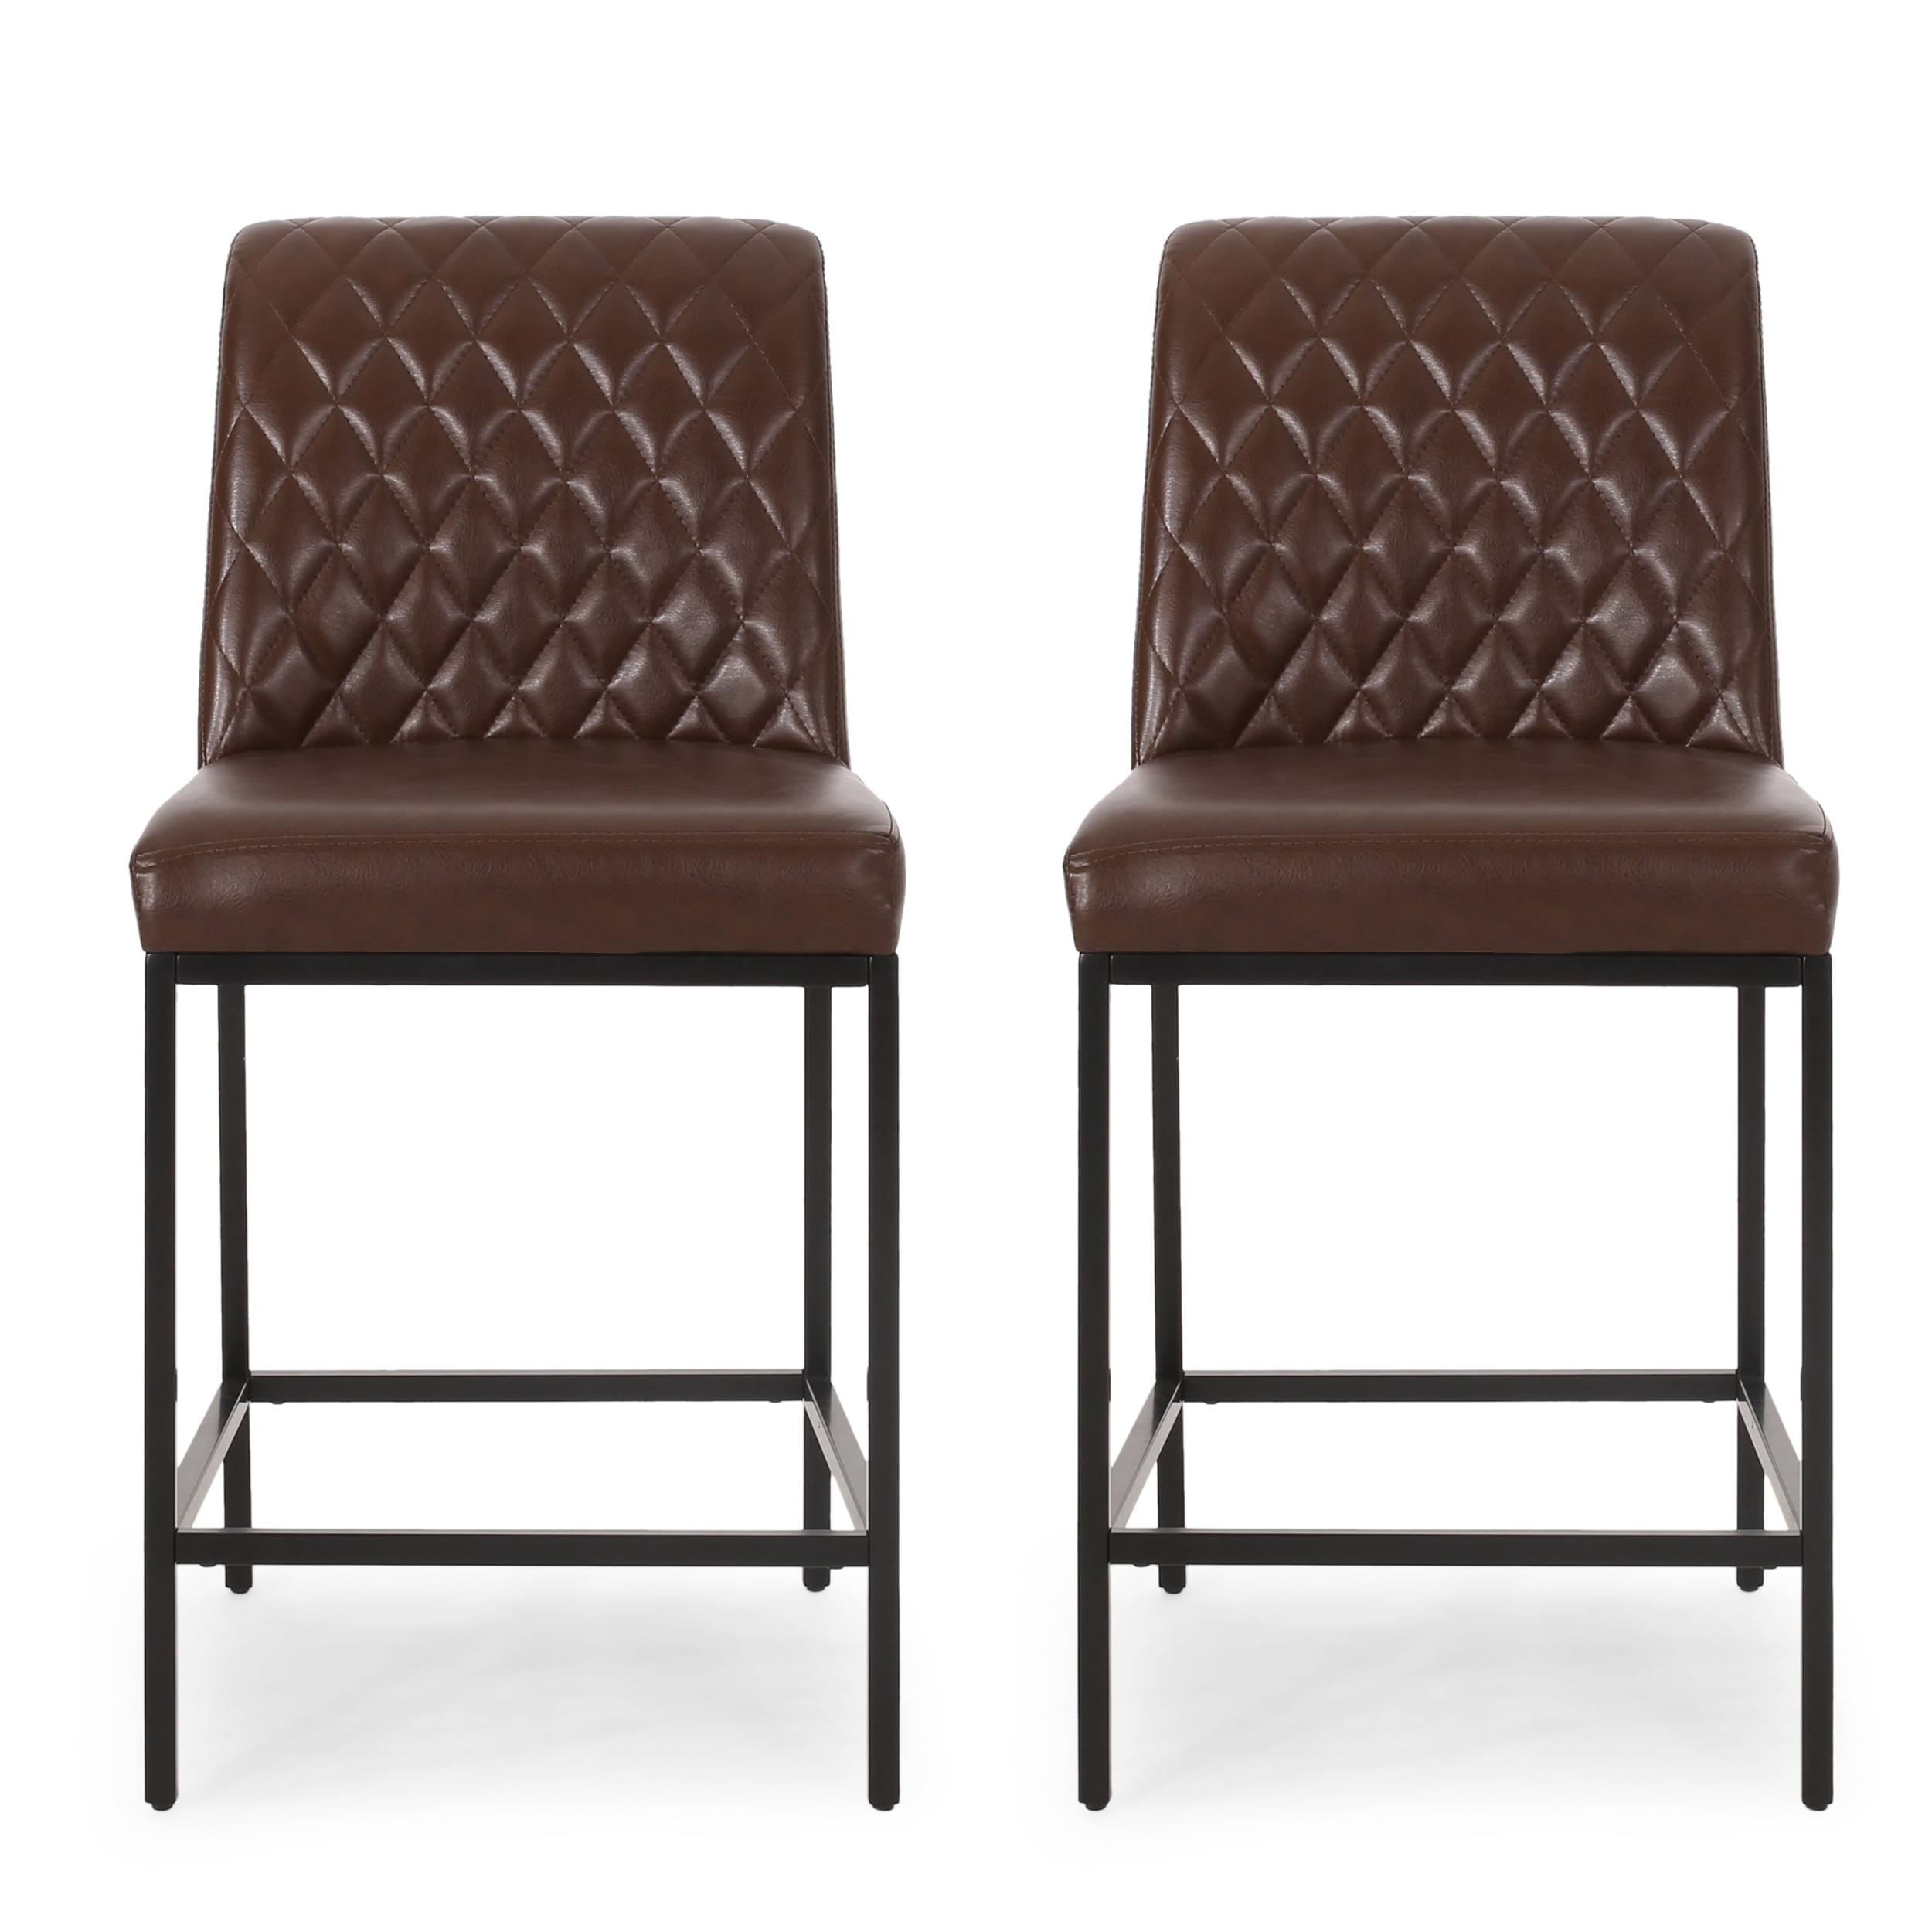 Refined Dark Brown Faux Leather Counter Stools with Diamond Stitch, Set of 2